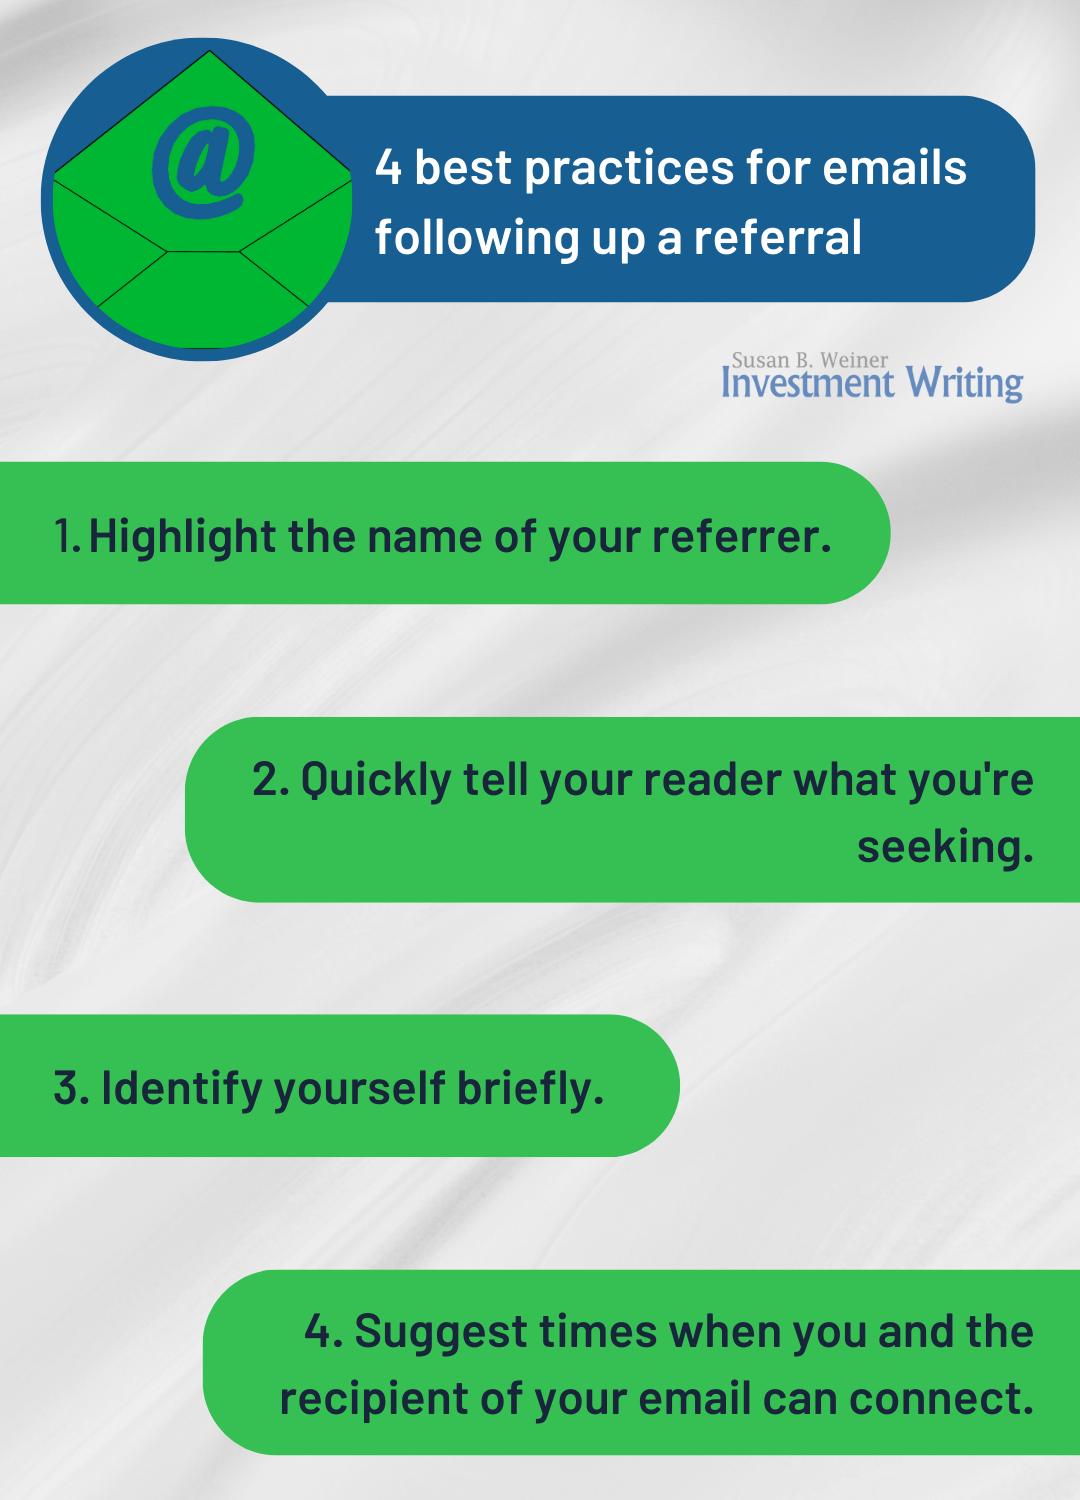 4 best practices for emails following up a referral infographic